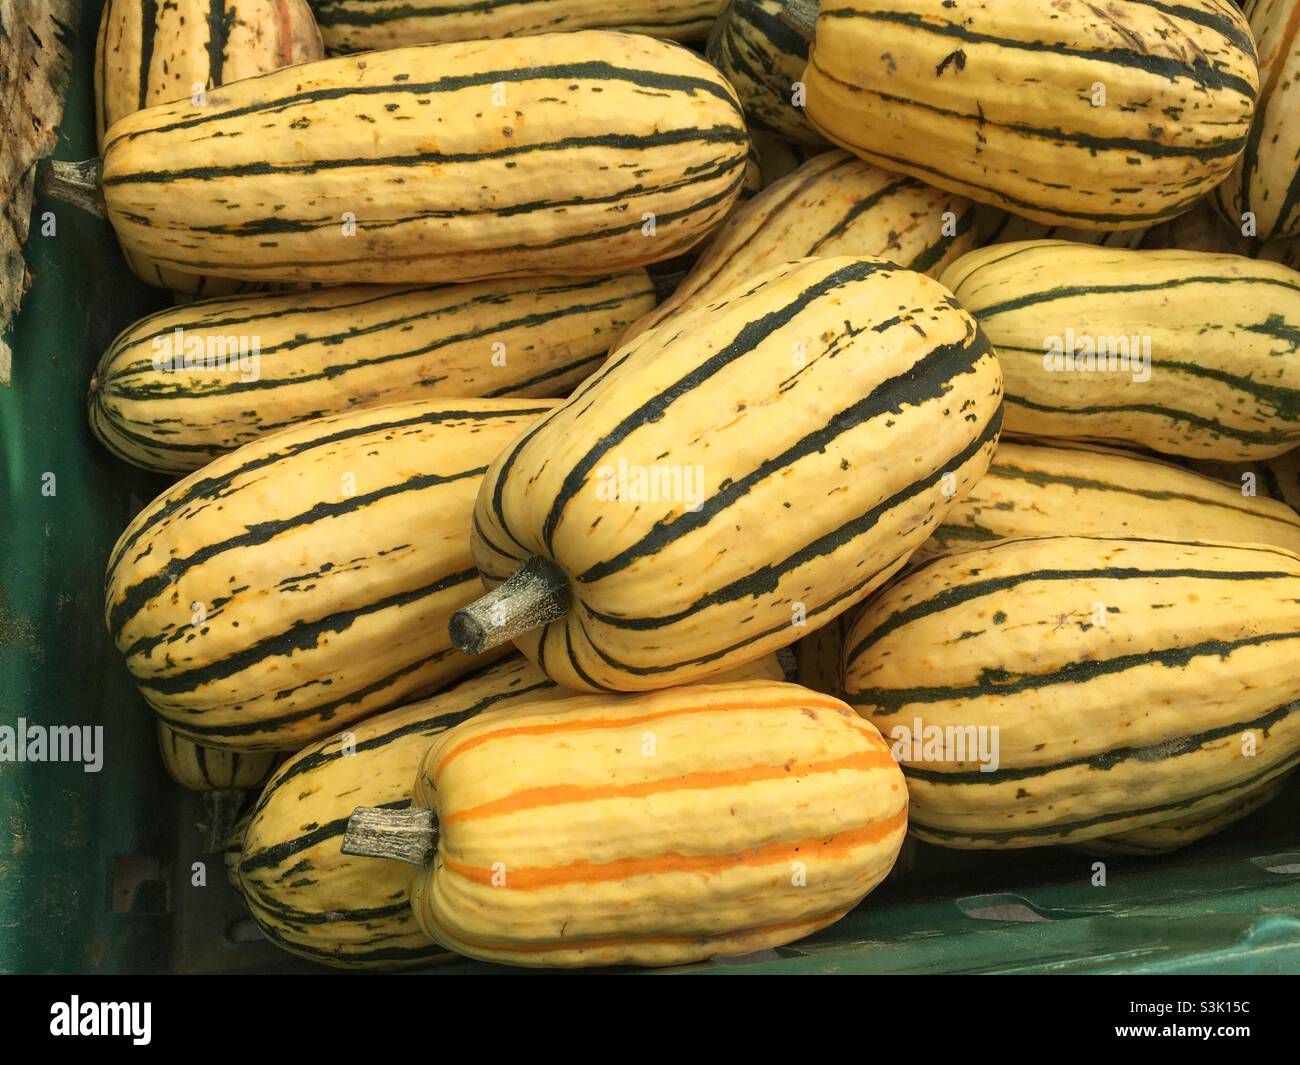 Organic Delicata squash, freshly harvested in a crate ready to sell Stock Photo